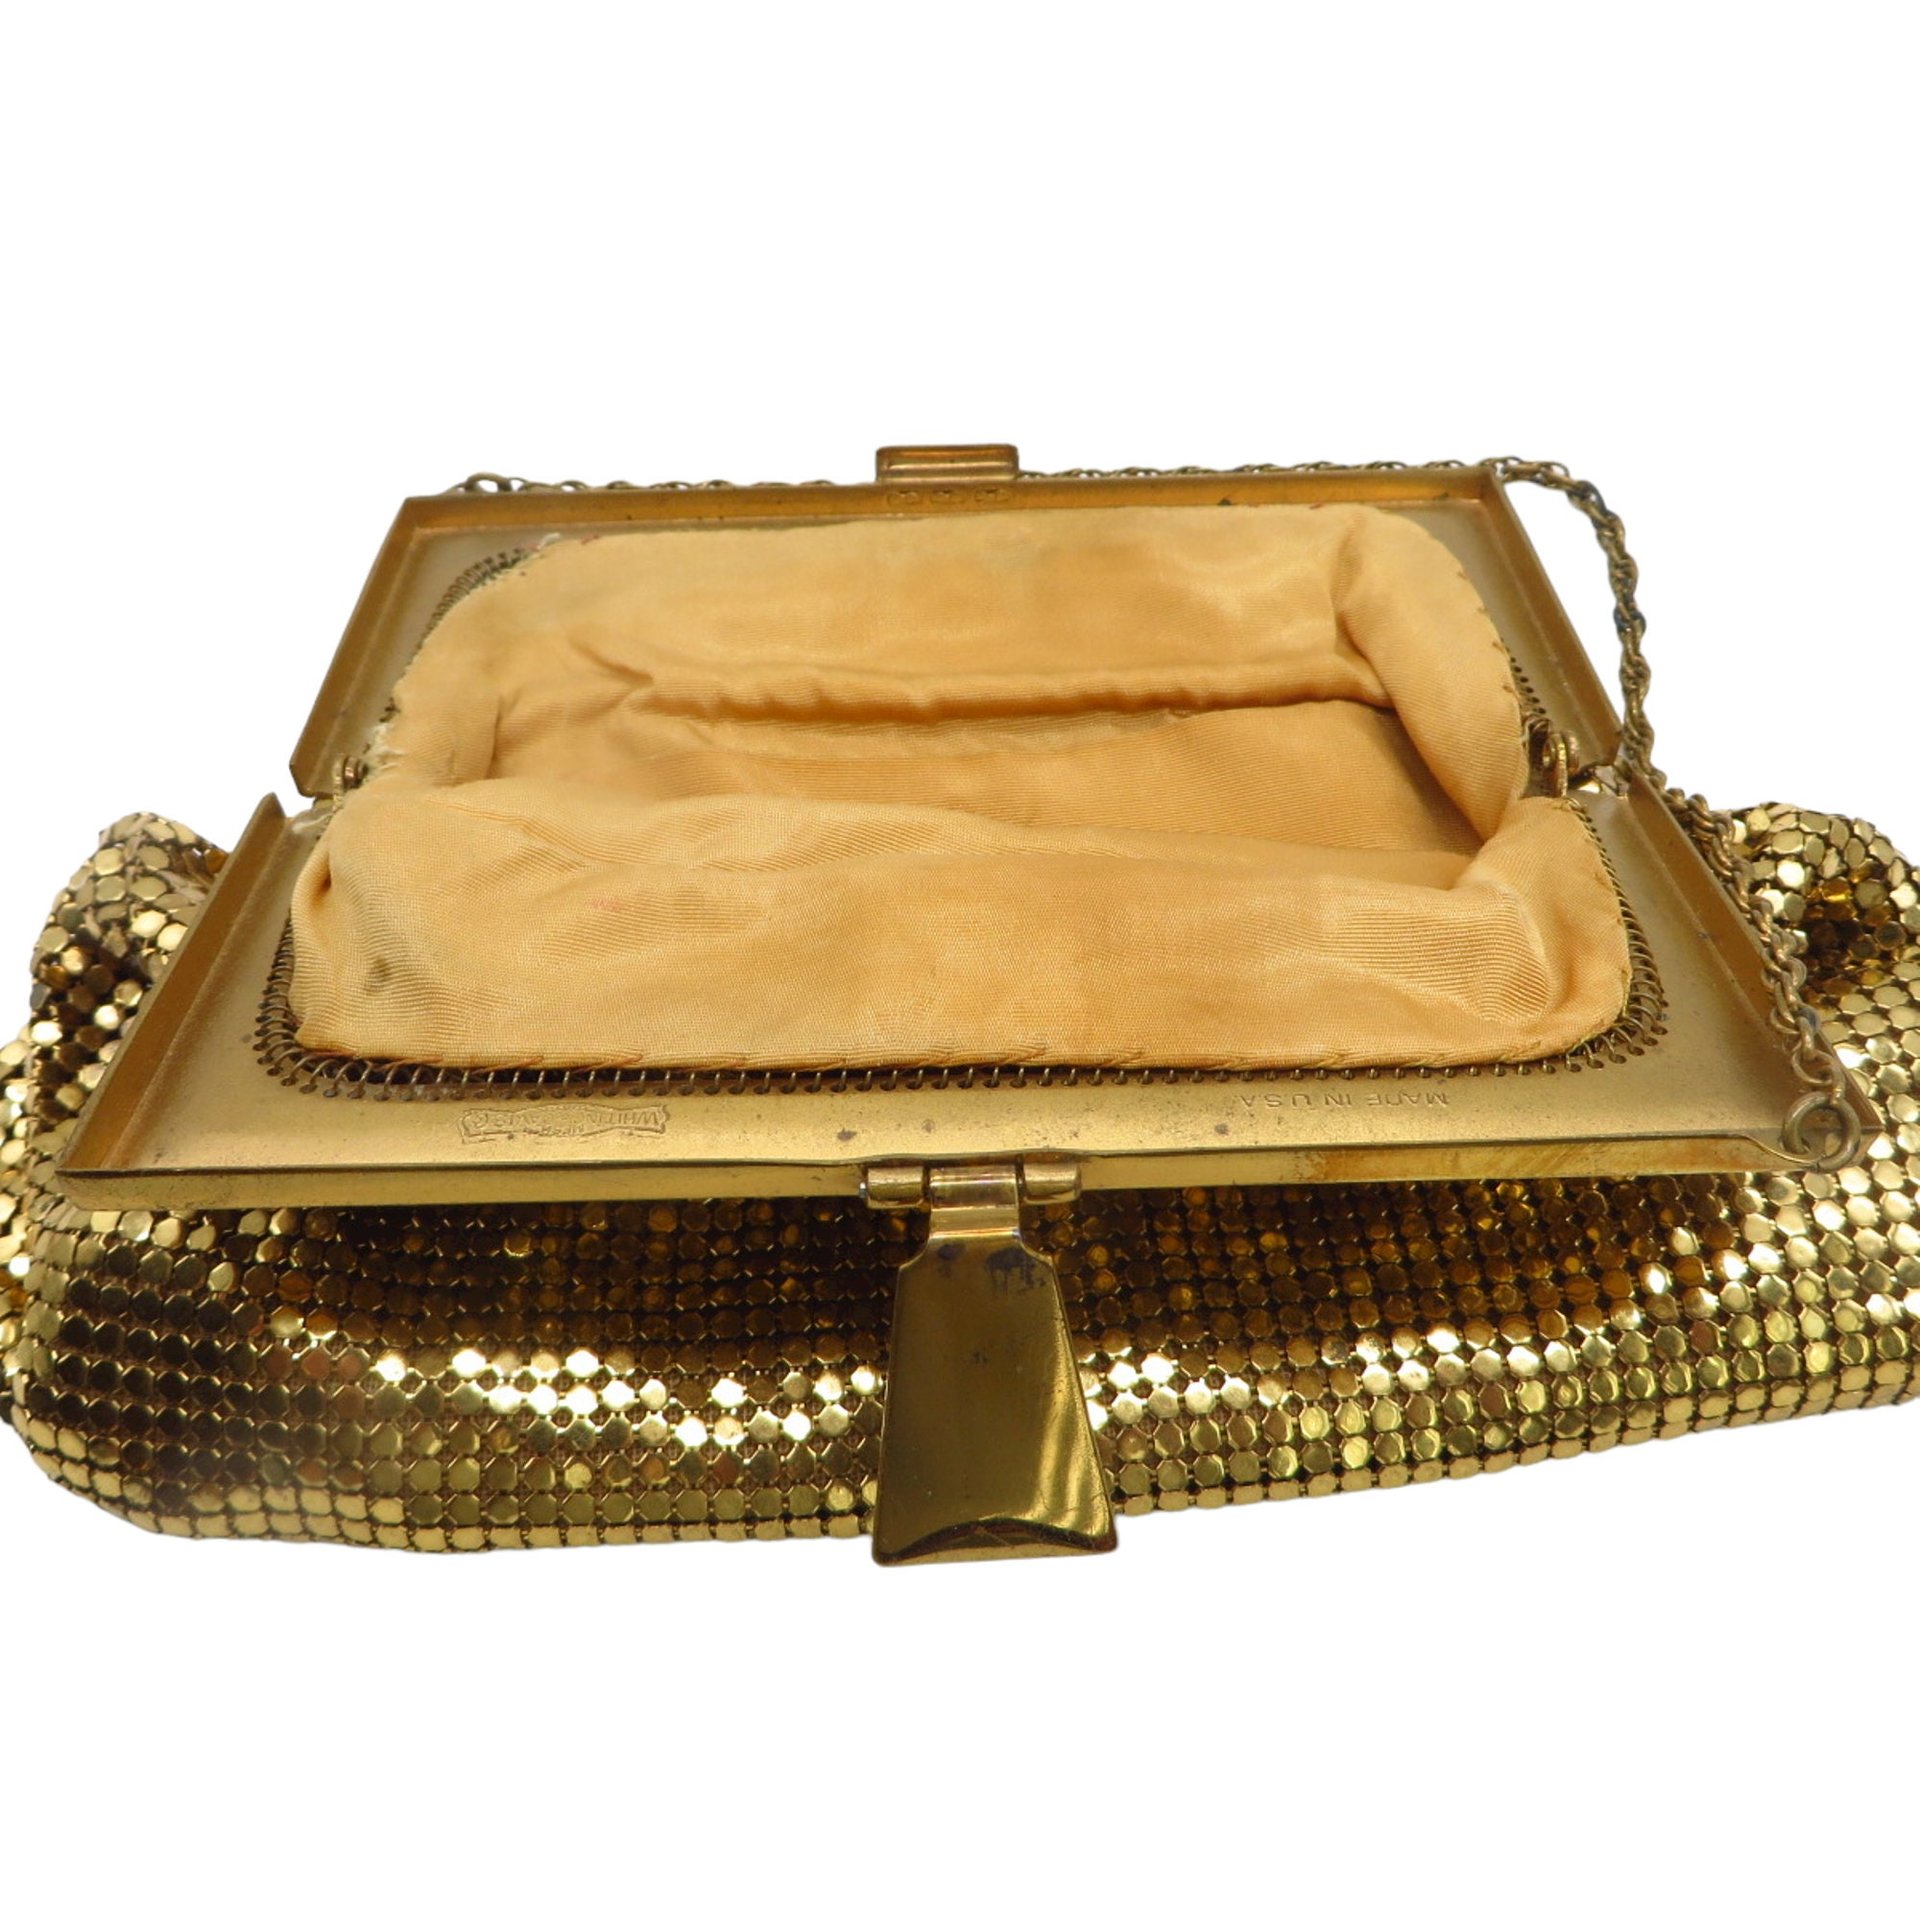 Whiting and Davis Purse, Vintage Gold Mesh Evening Bag